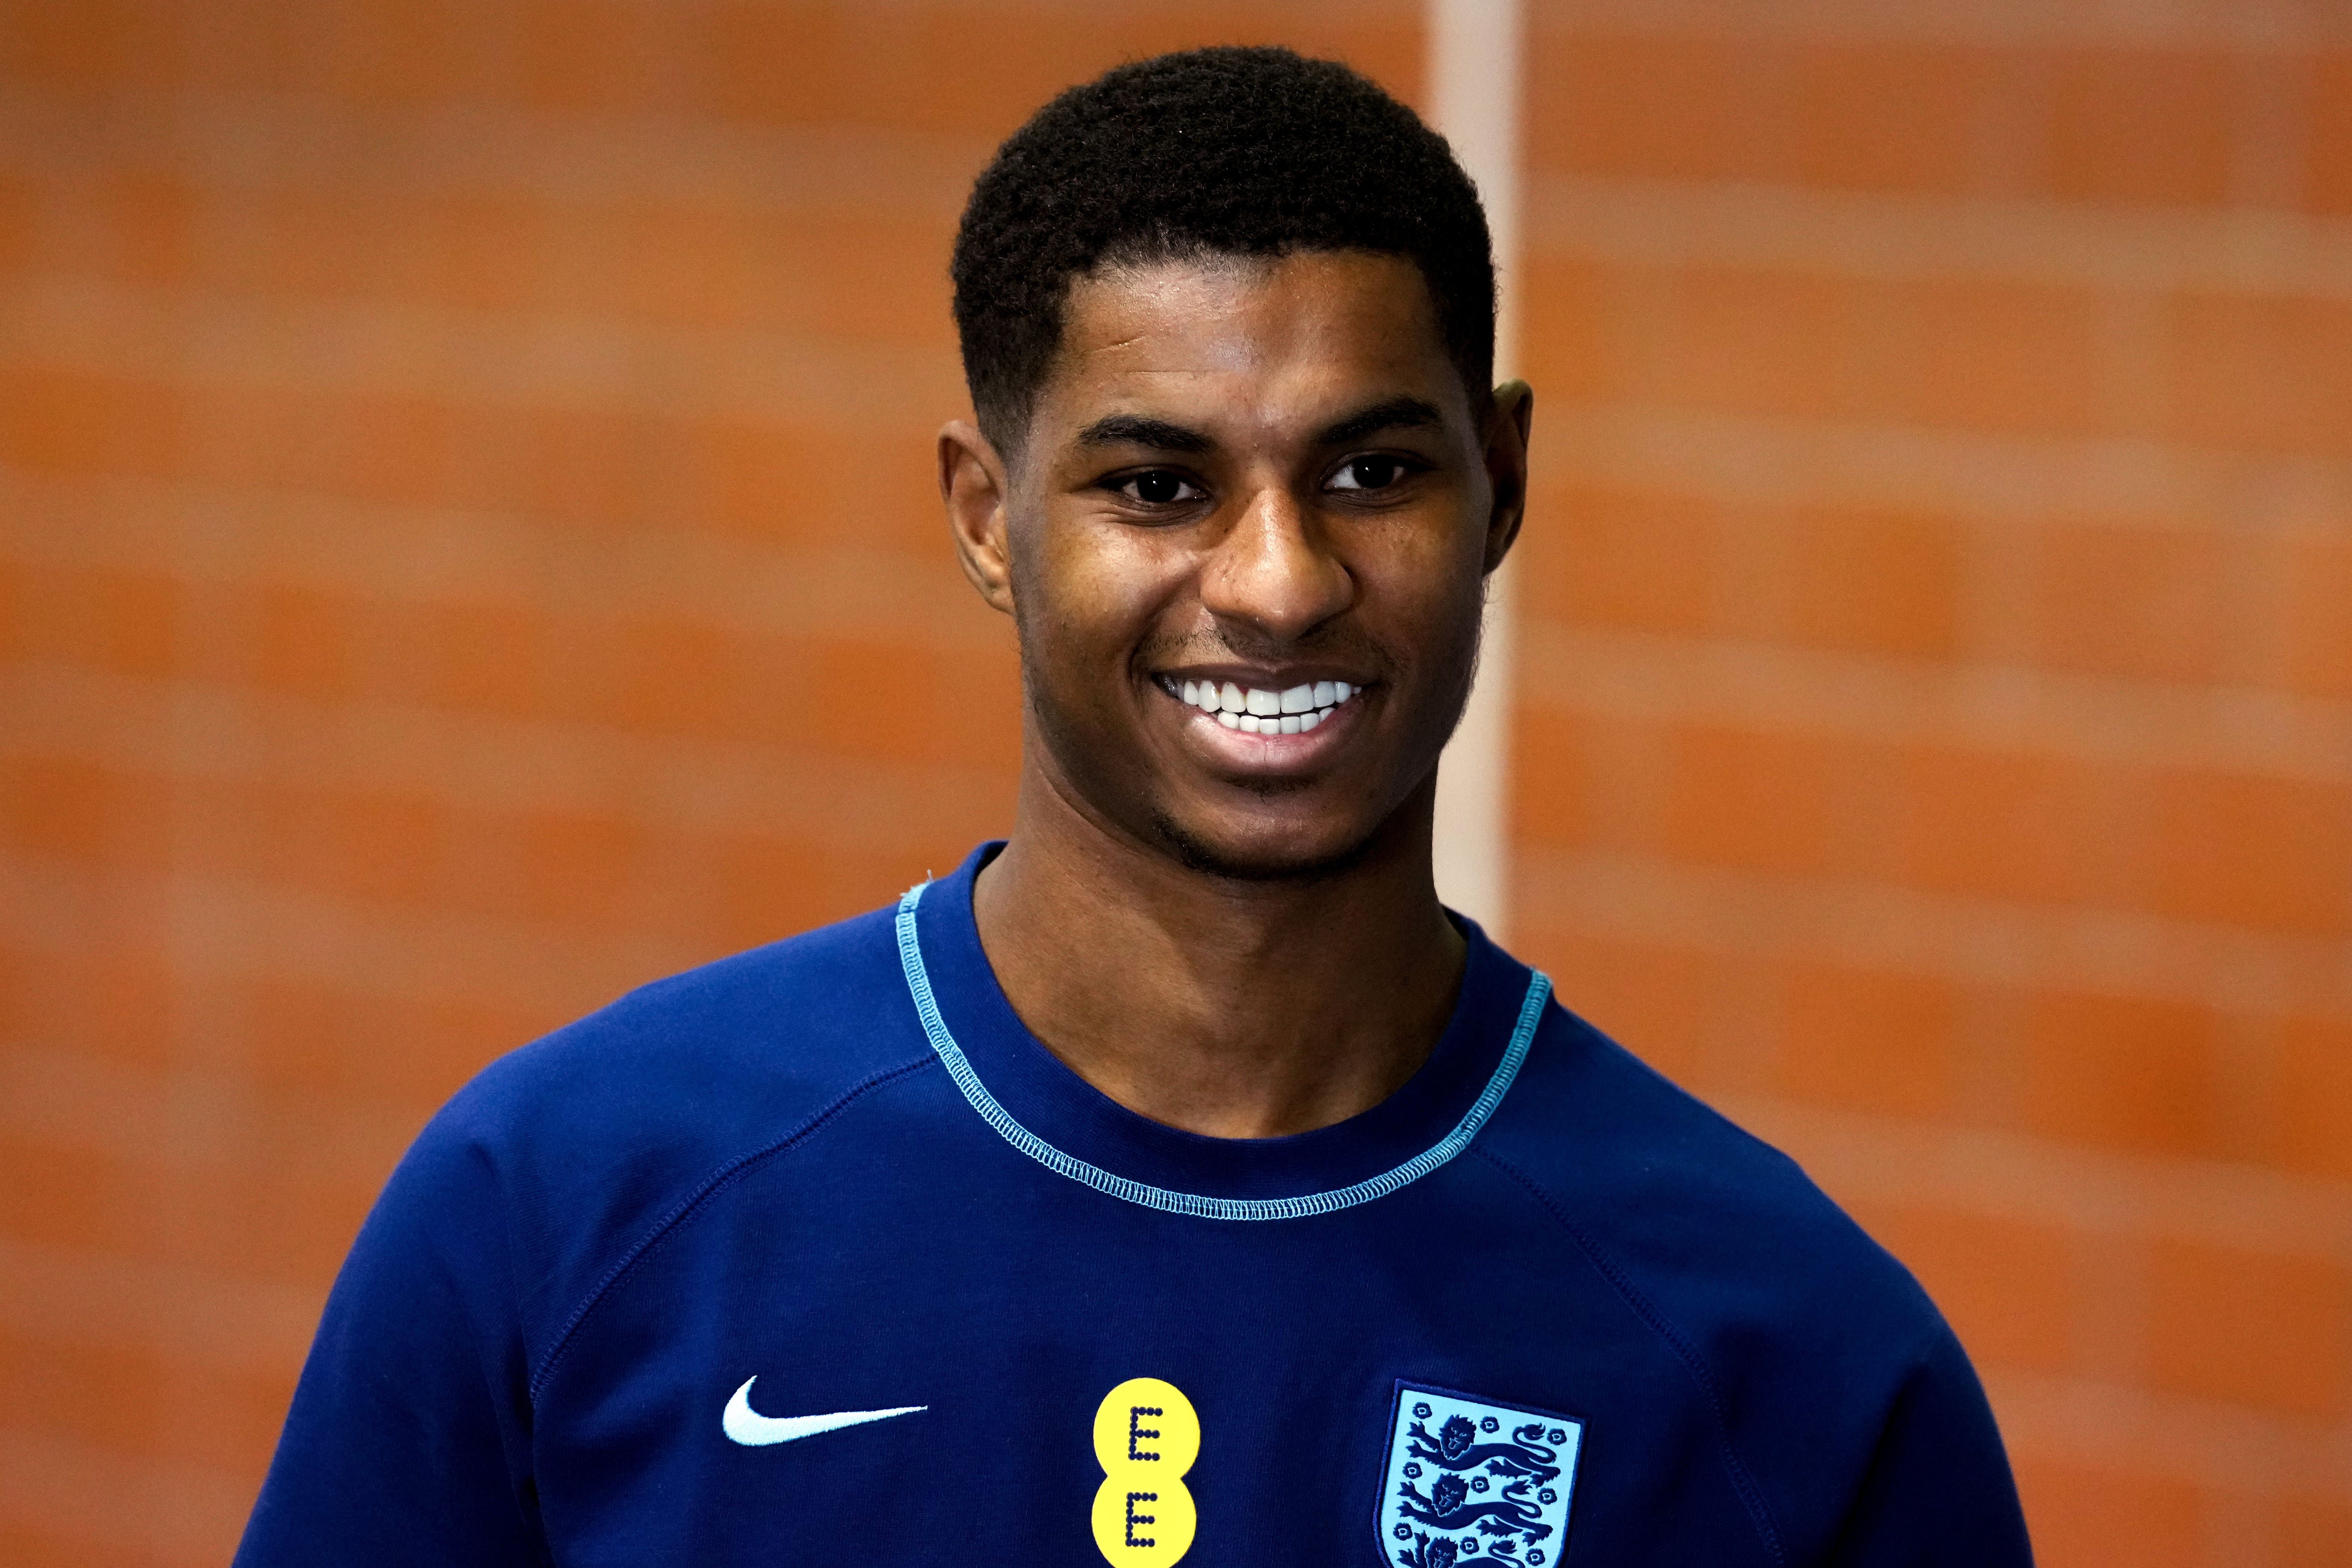 Manchester United striker Rashford’s book You Can Do It: How To Find Your Voice And Make A Difference is on the secondary school list for those aged 12 to 16 (PA)